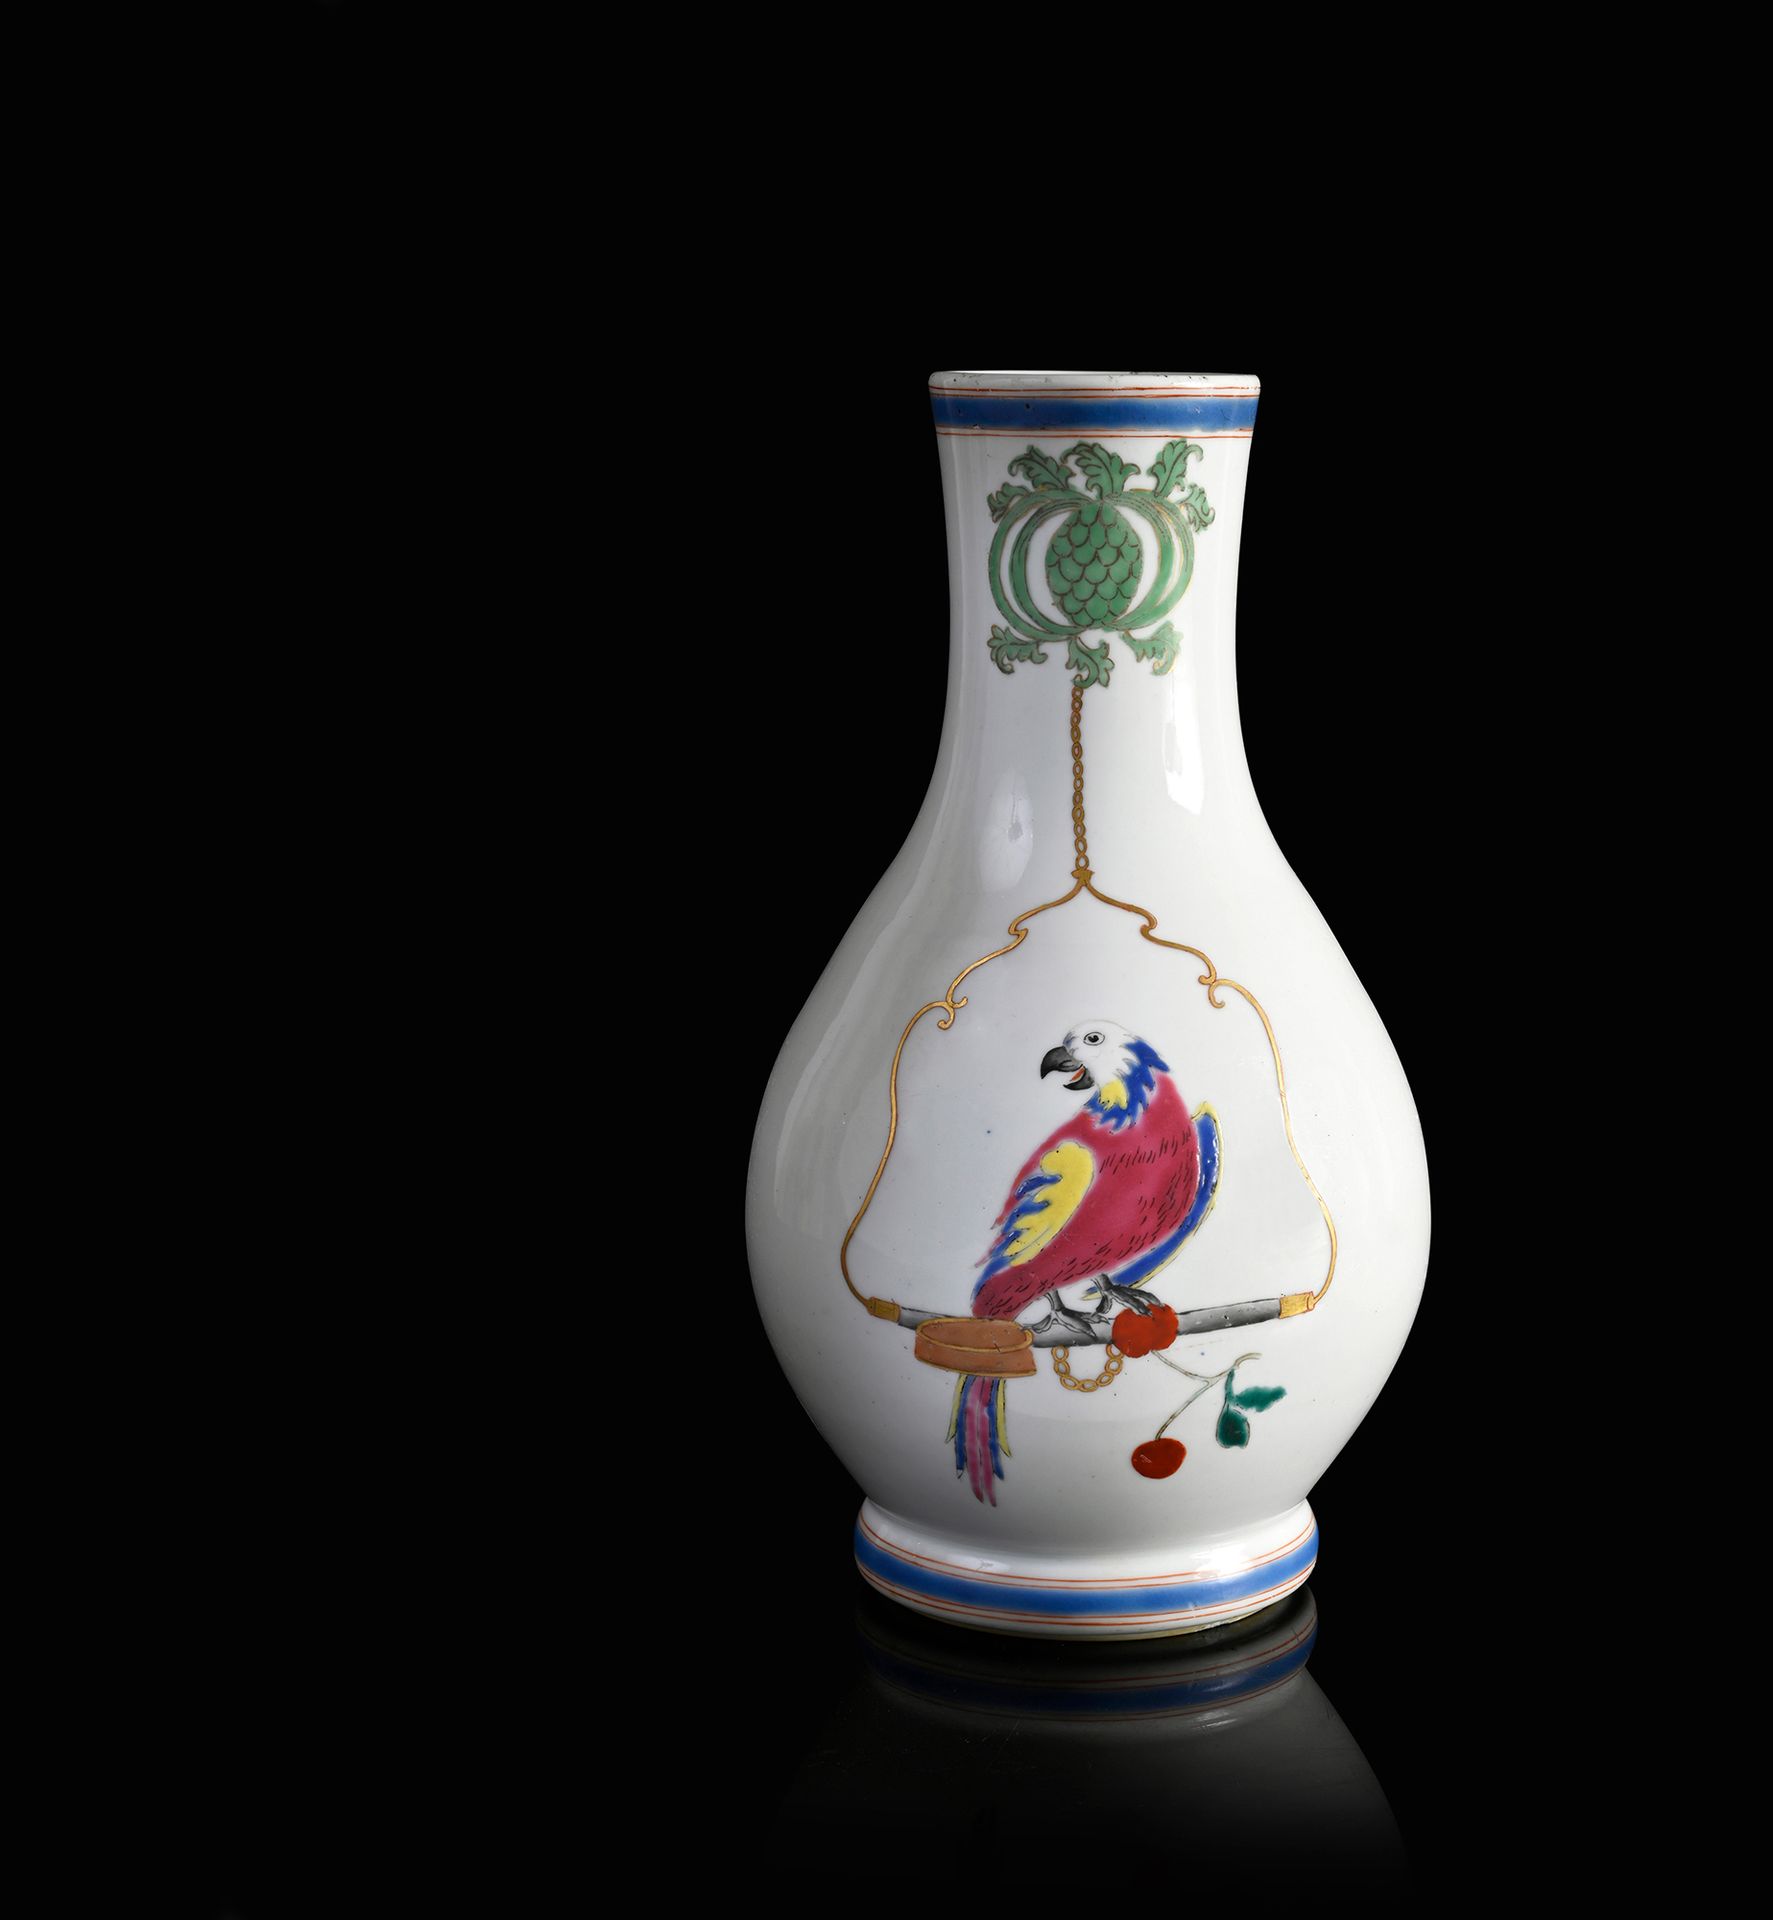 CHINE, Compagnie des Indes, XVIIIe siècle* Rare porcelain vase
Mounted on a foot&hellip;